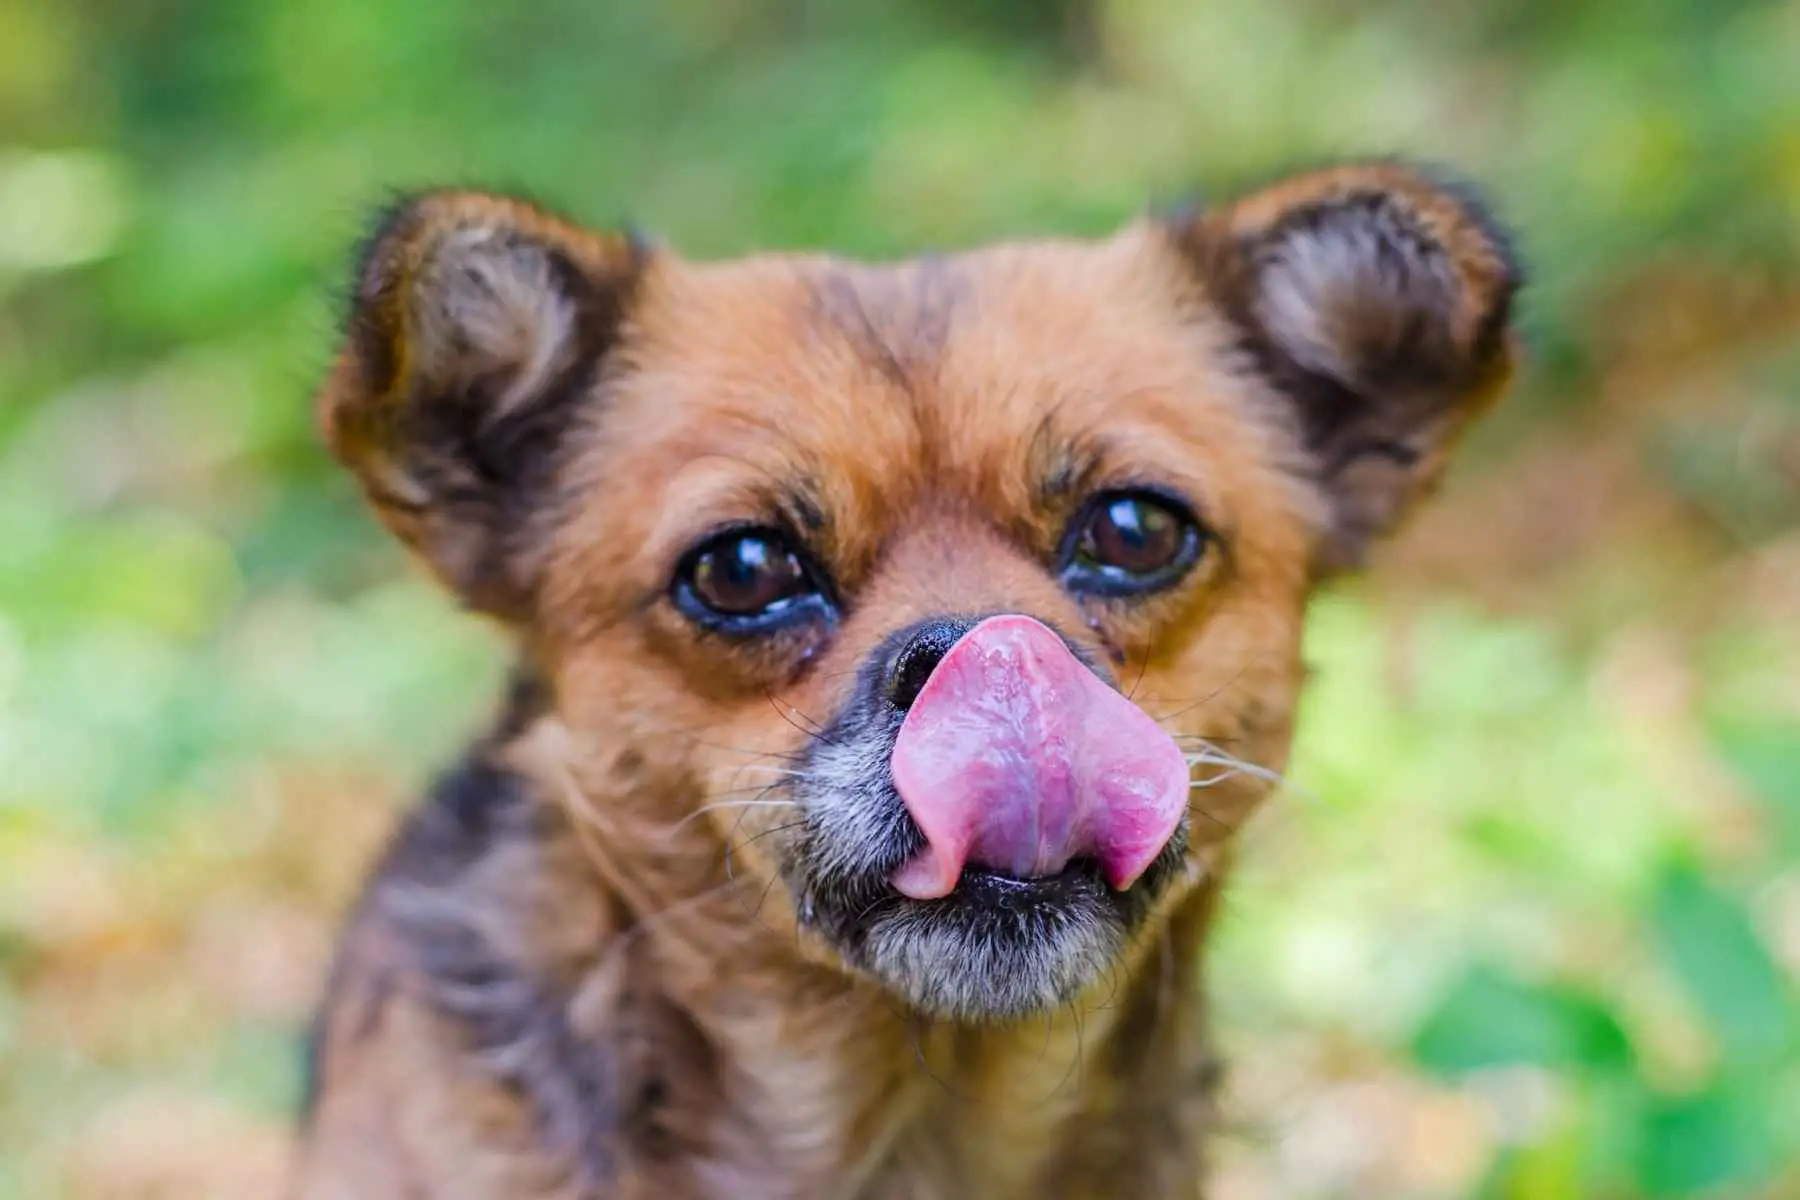 Cute dog licking its nose